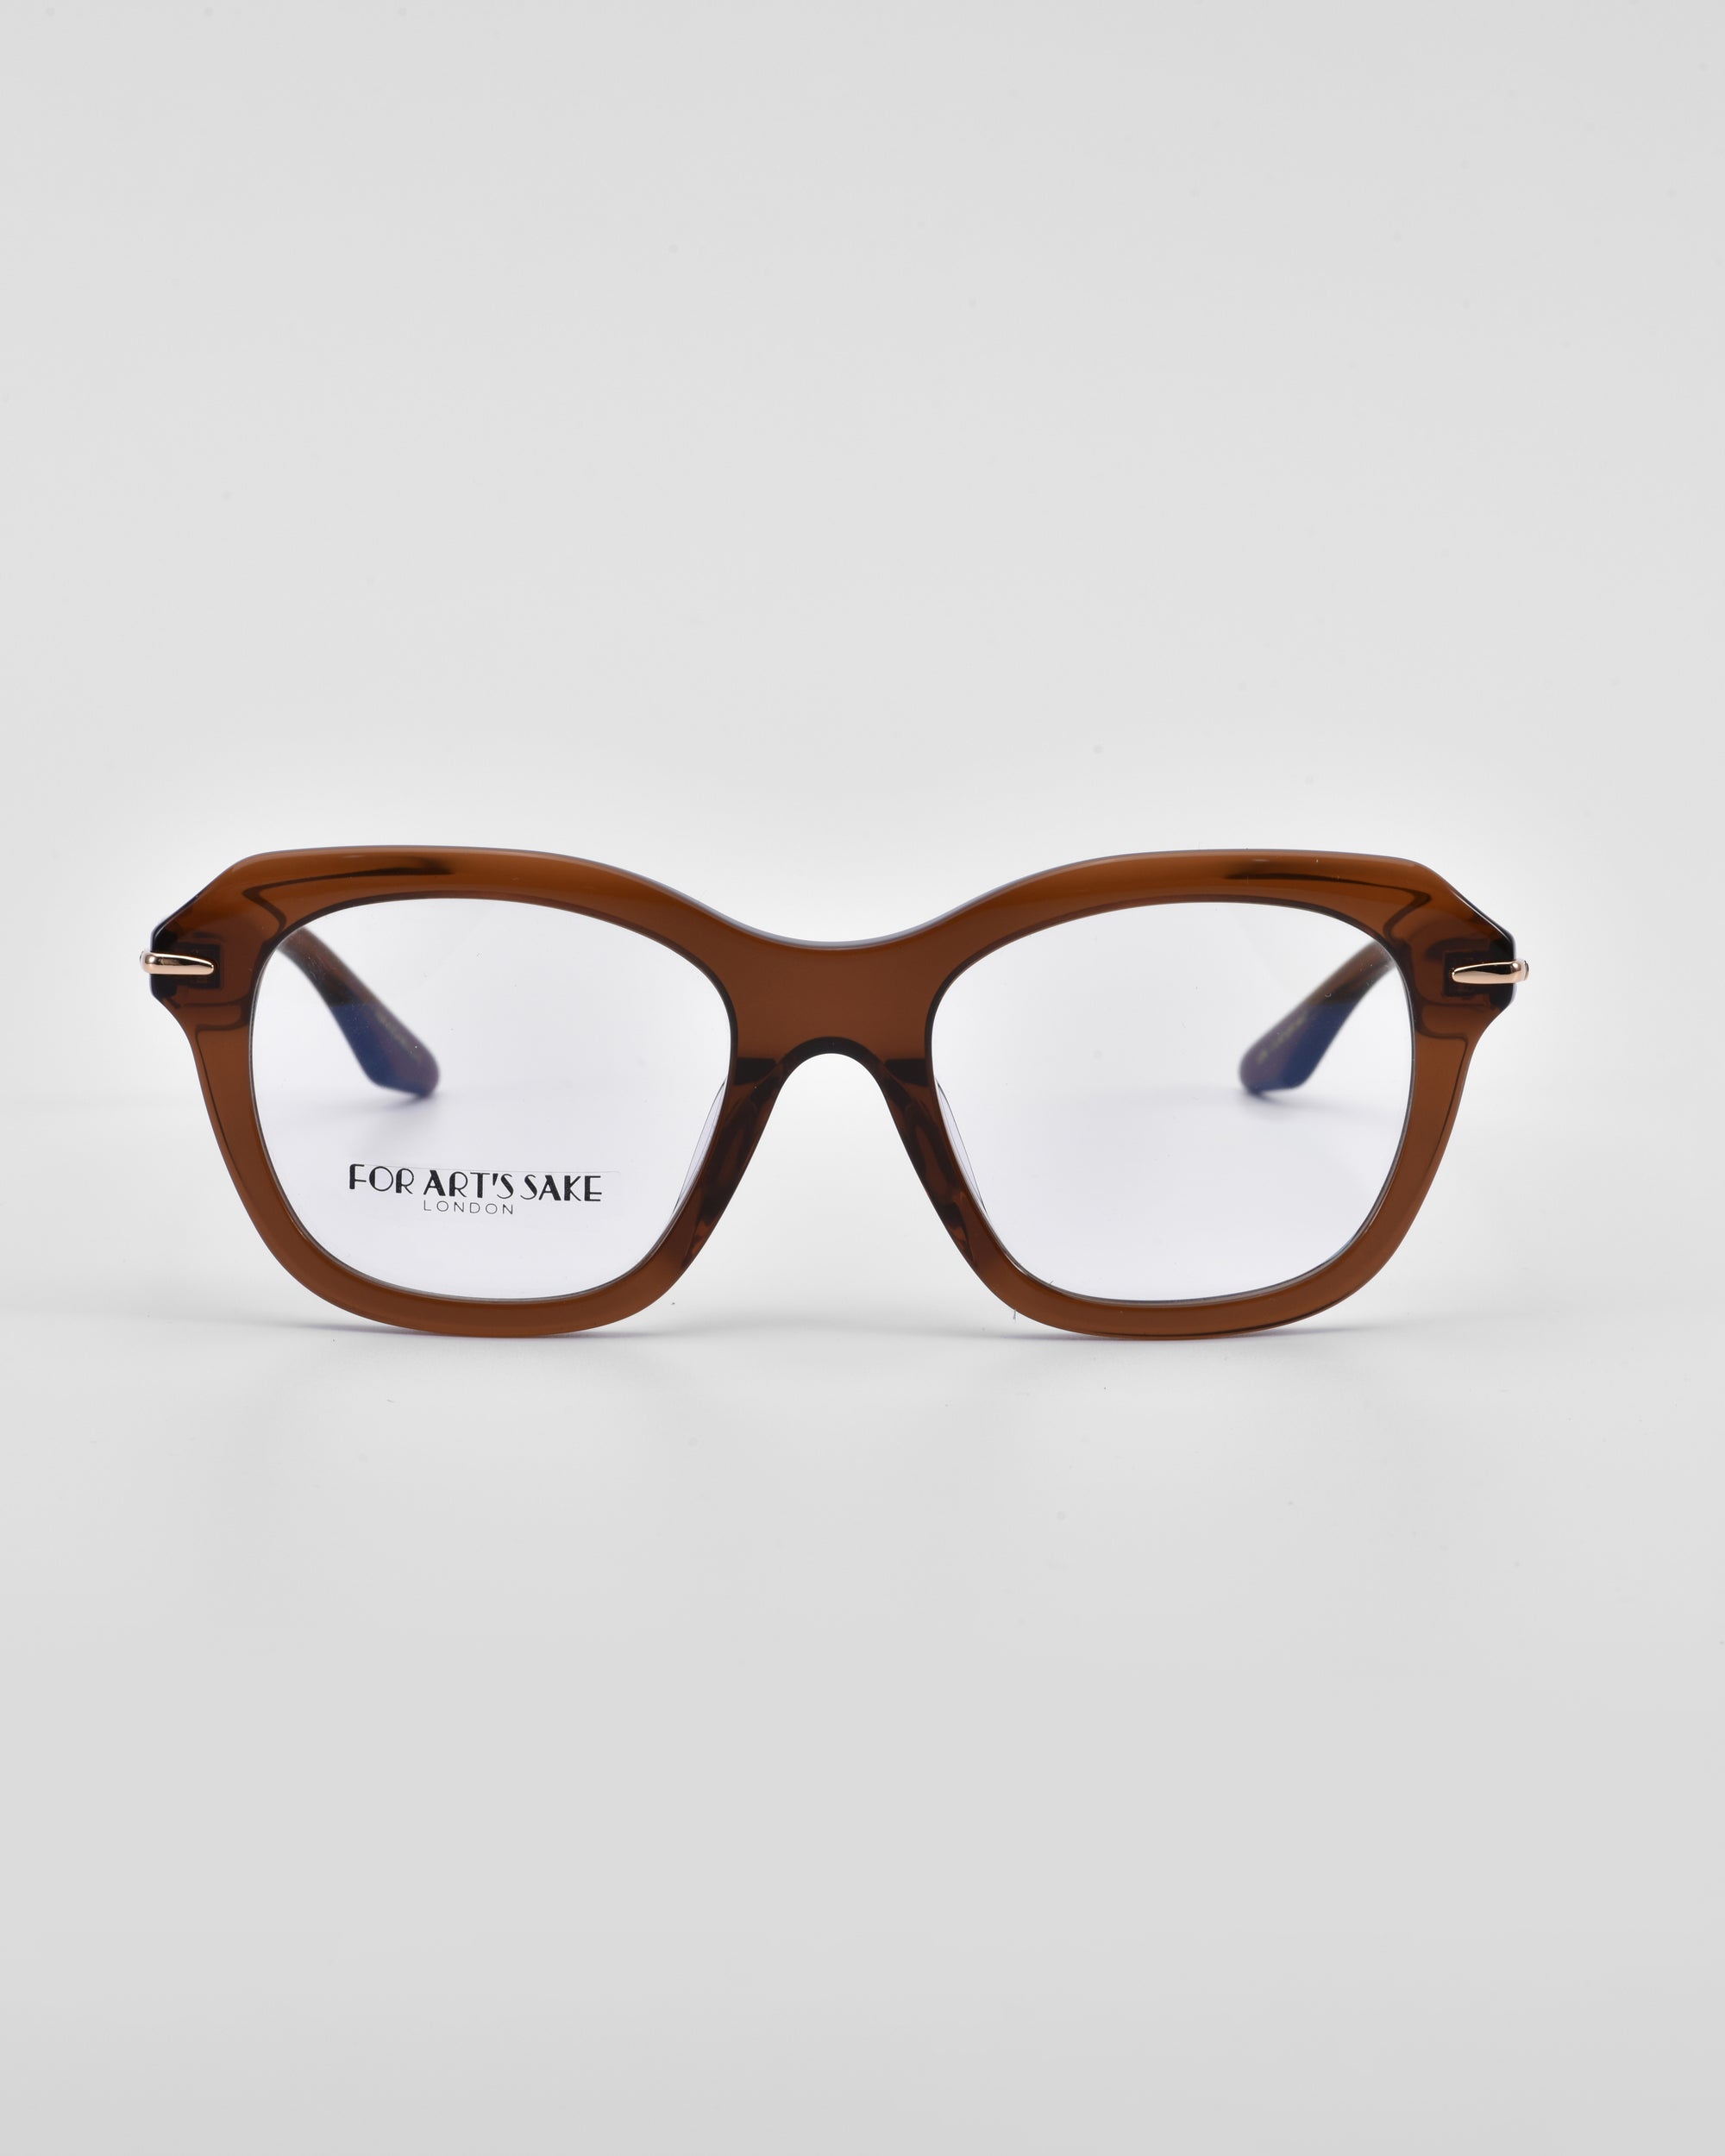 A pair of square-shaped, brown-framed eyeglasses with clear lenses is centered against a white background. The left lens features the brand name &quot;For Art&#39;s Sake®&quot; printed in small black text, showcasing their exquisite craftsmanship in 18-karat gold plating. This particular product is known as the Helene.